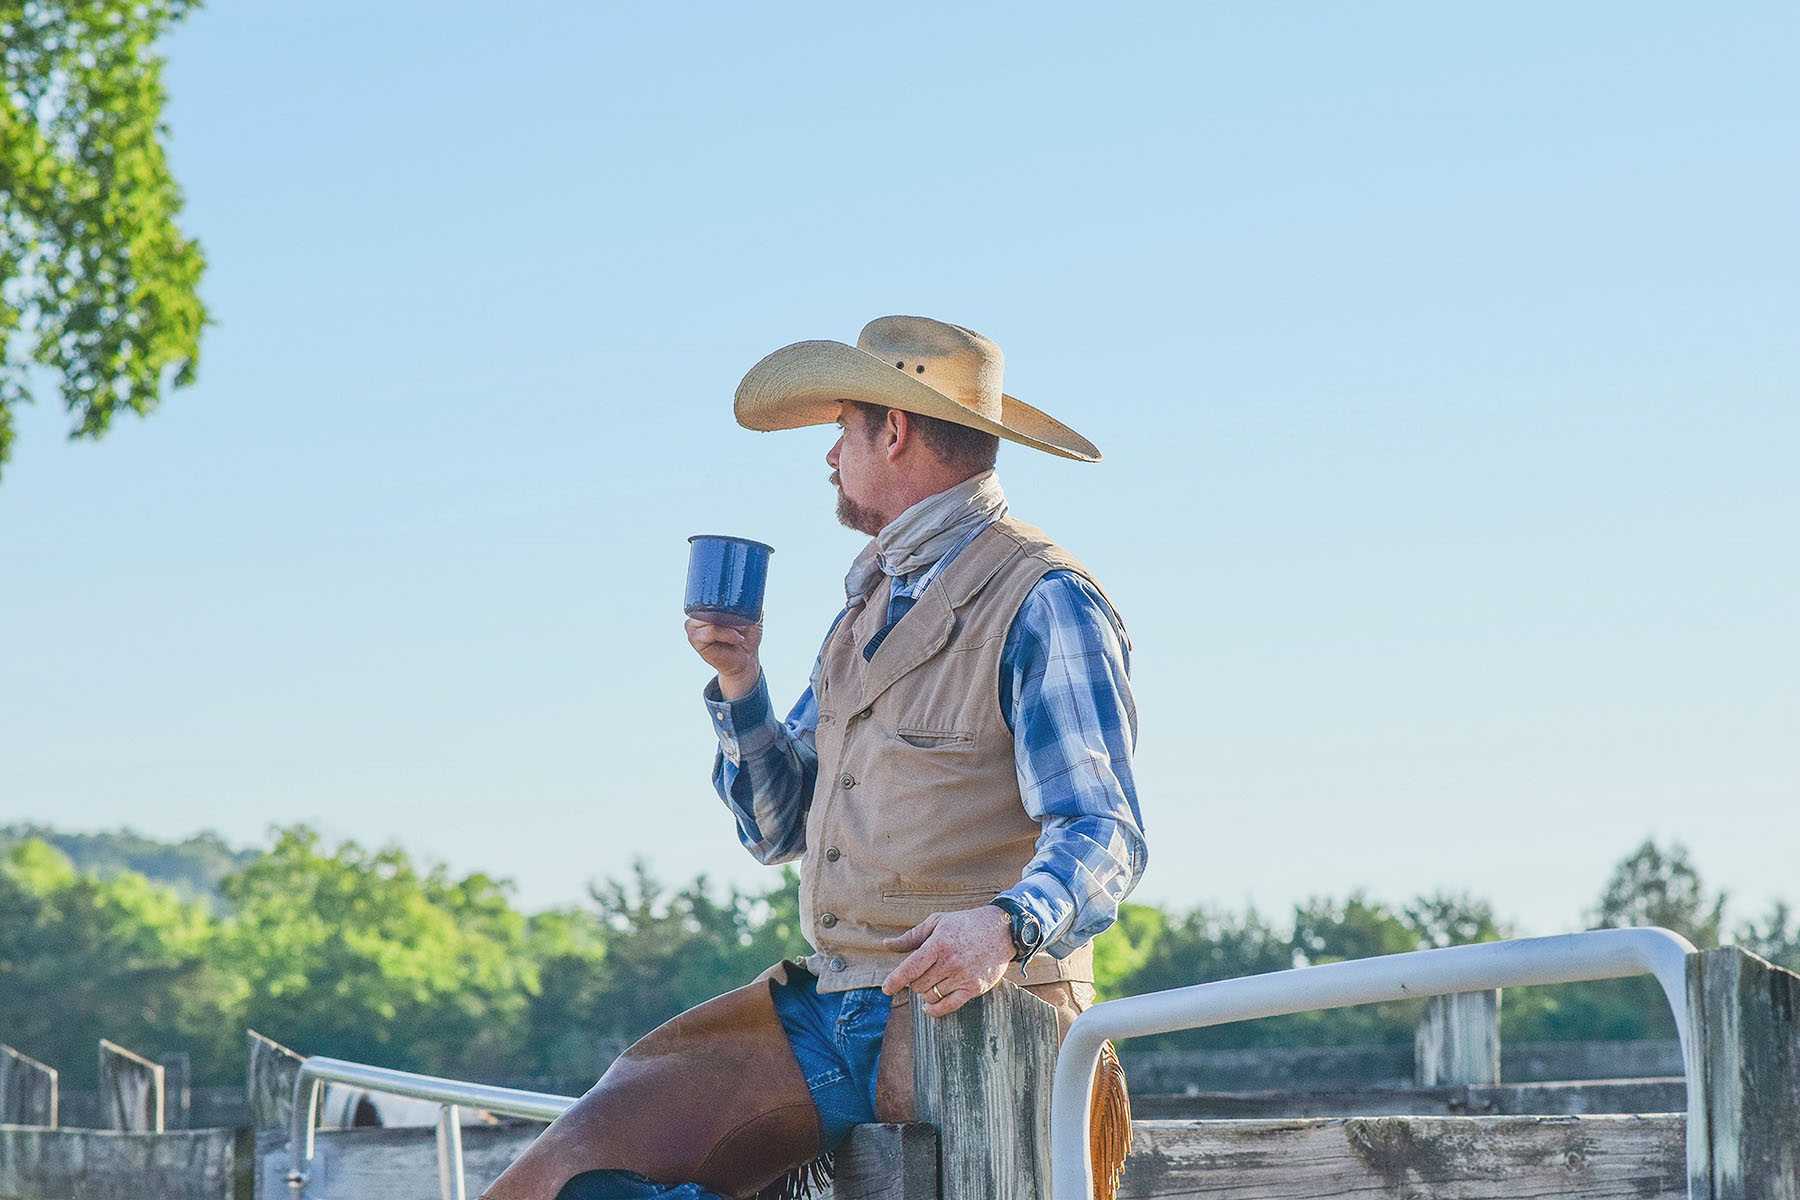 How To Make Cowboy Coffee – 3 Simple Methods